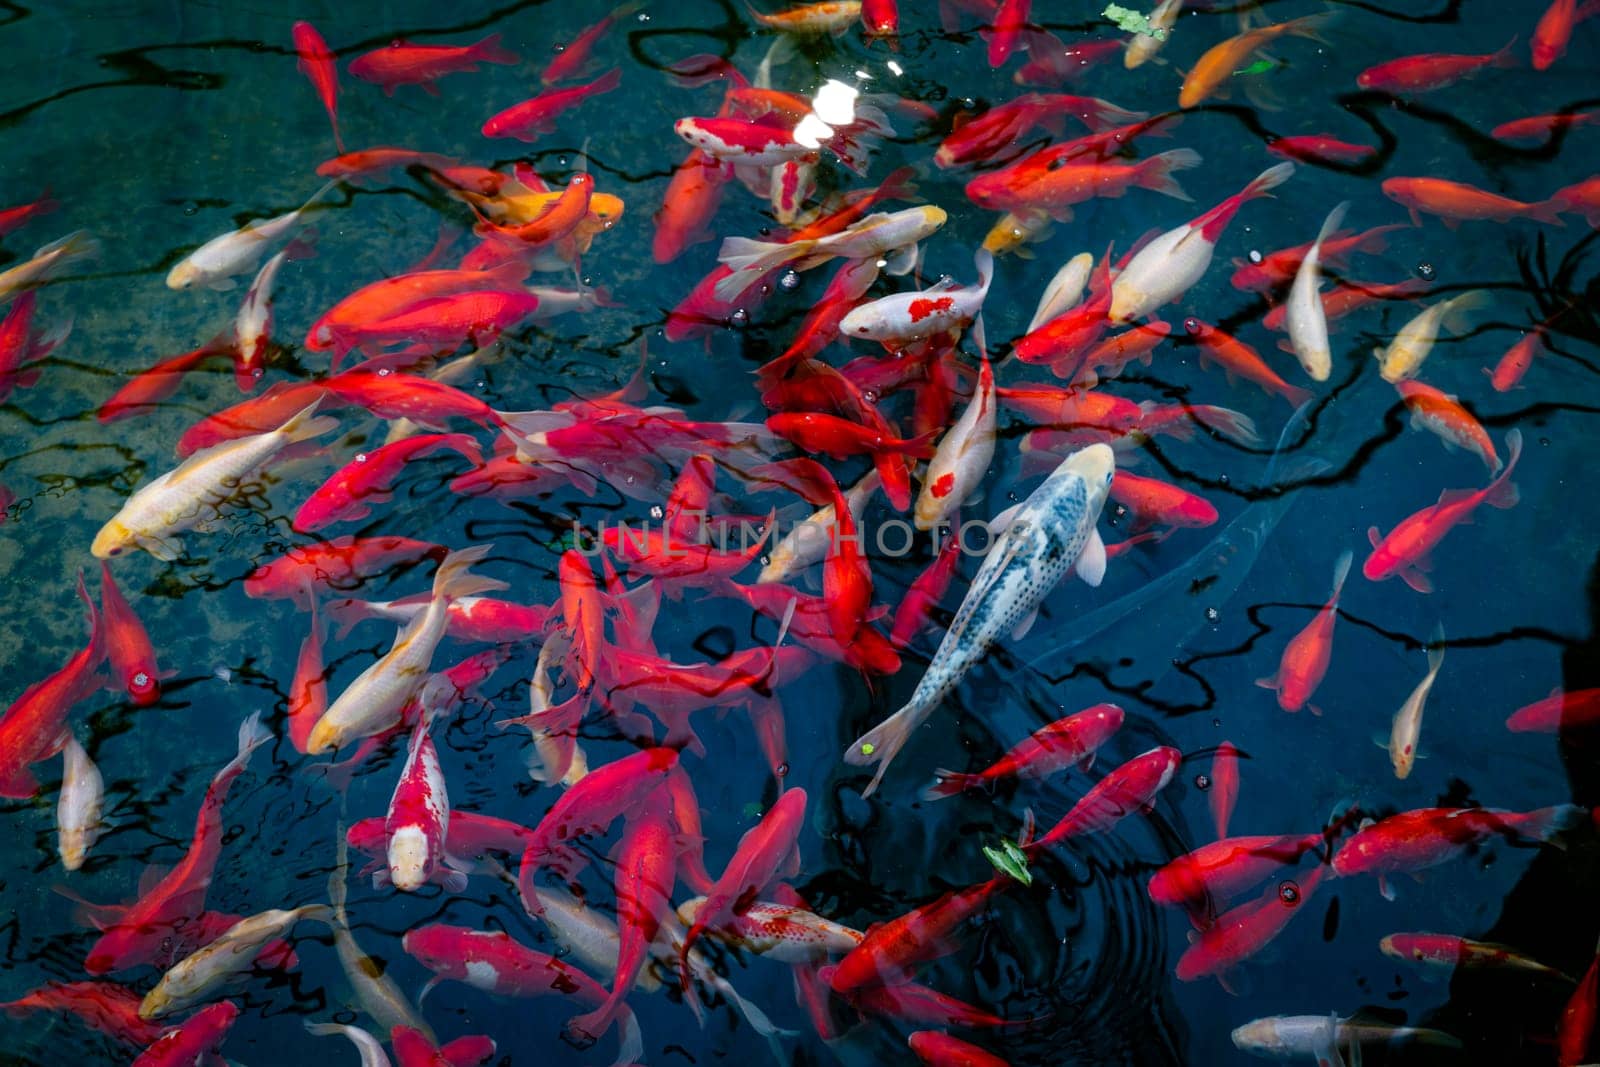 a school of fish such as goldfish carp and koi carp in the water as a background